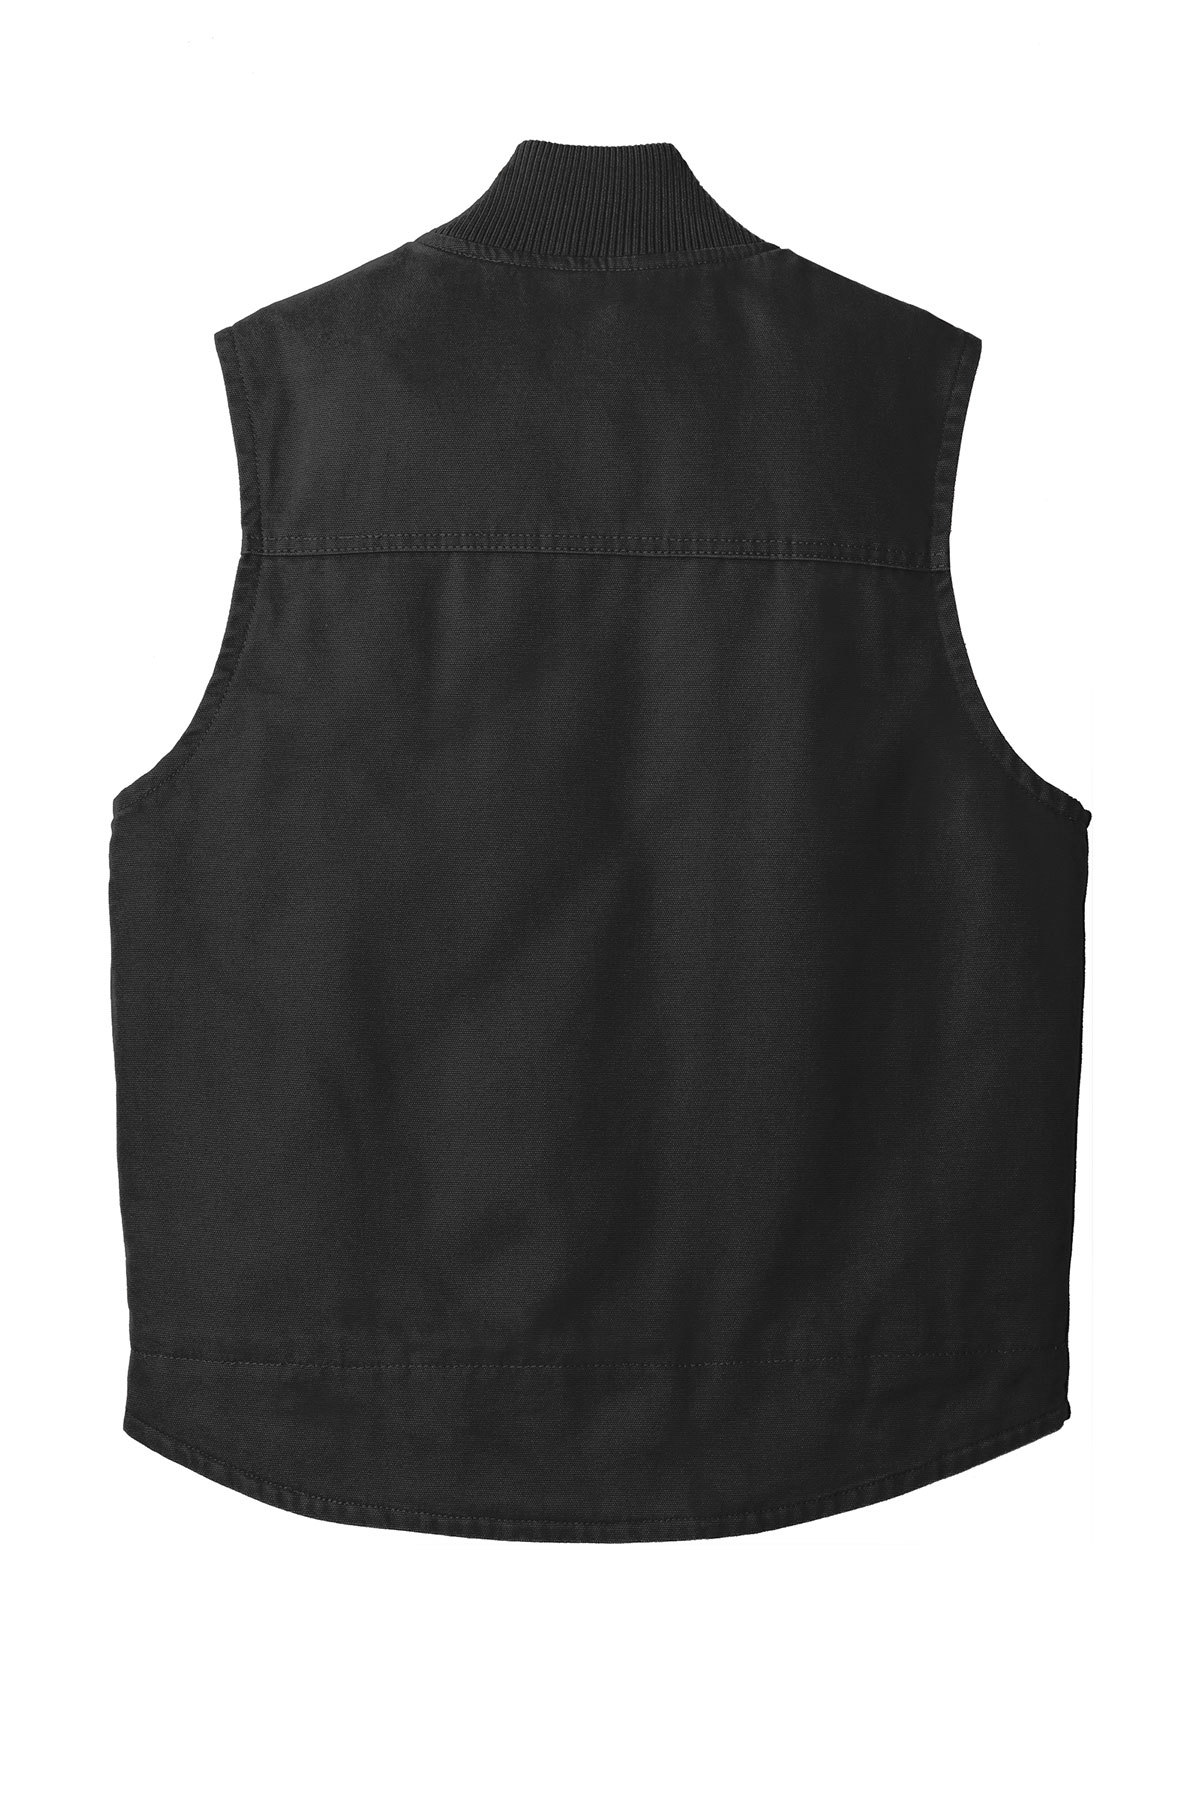 CornerStone Washed Duck Cloth Vest | Product | SanMar